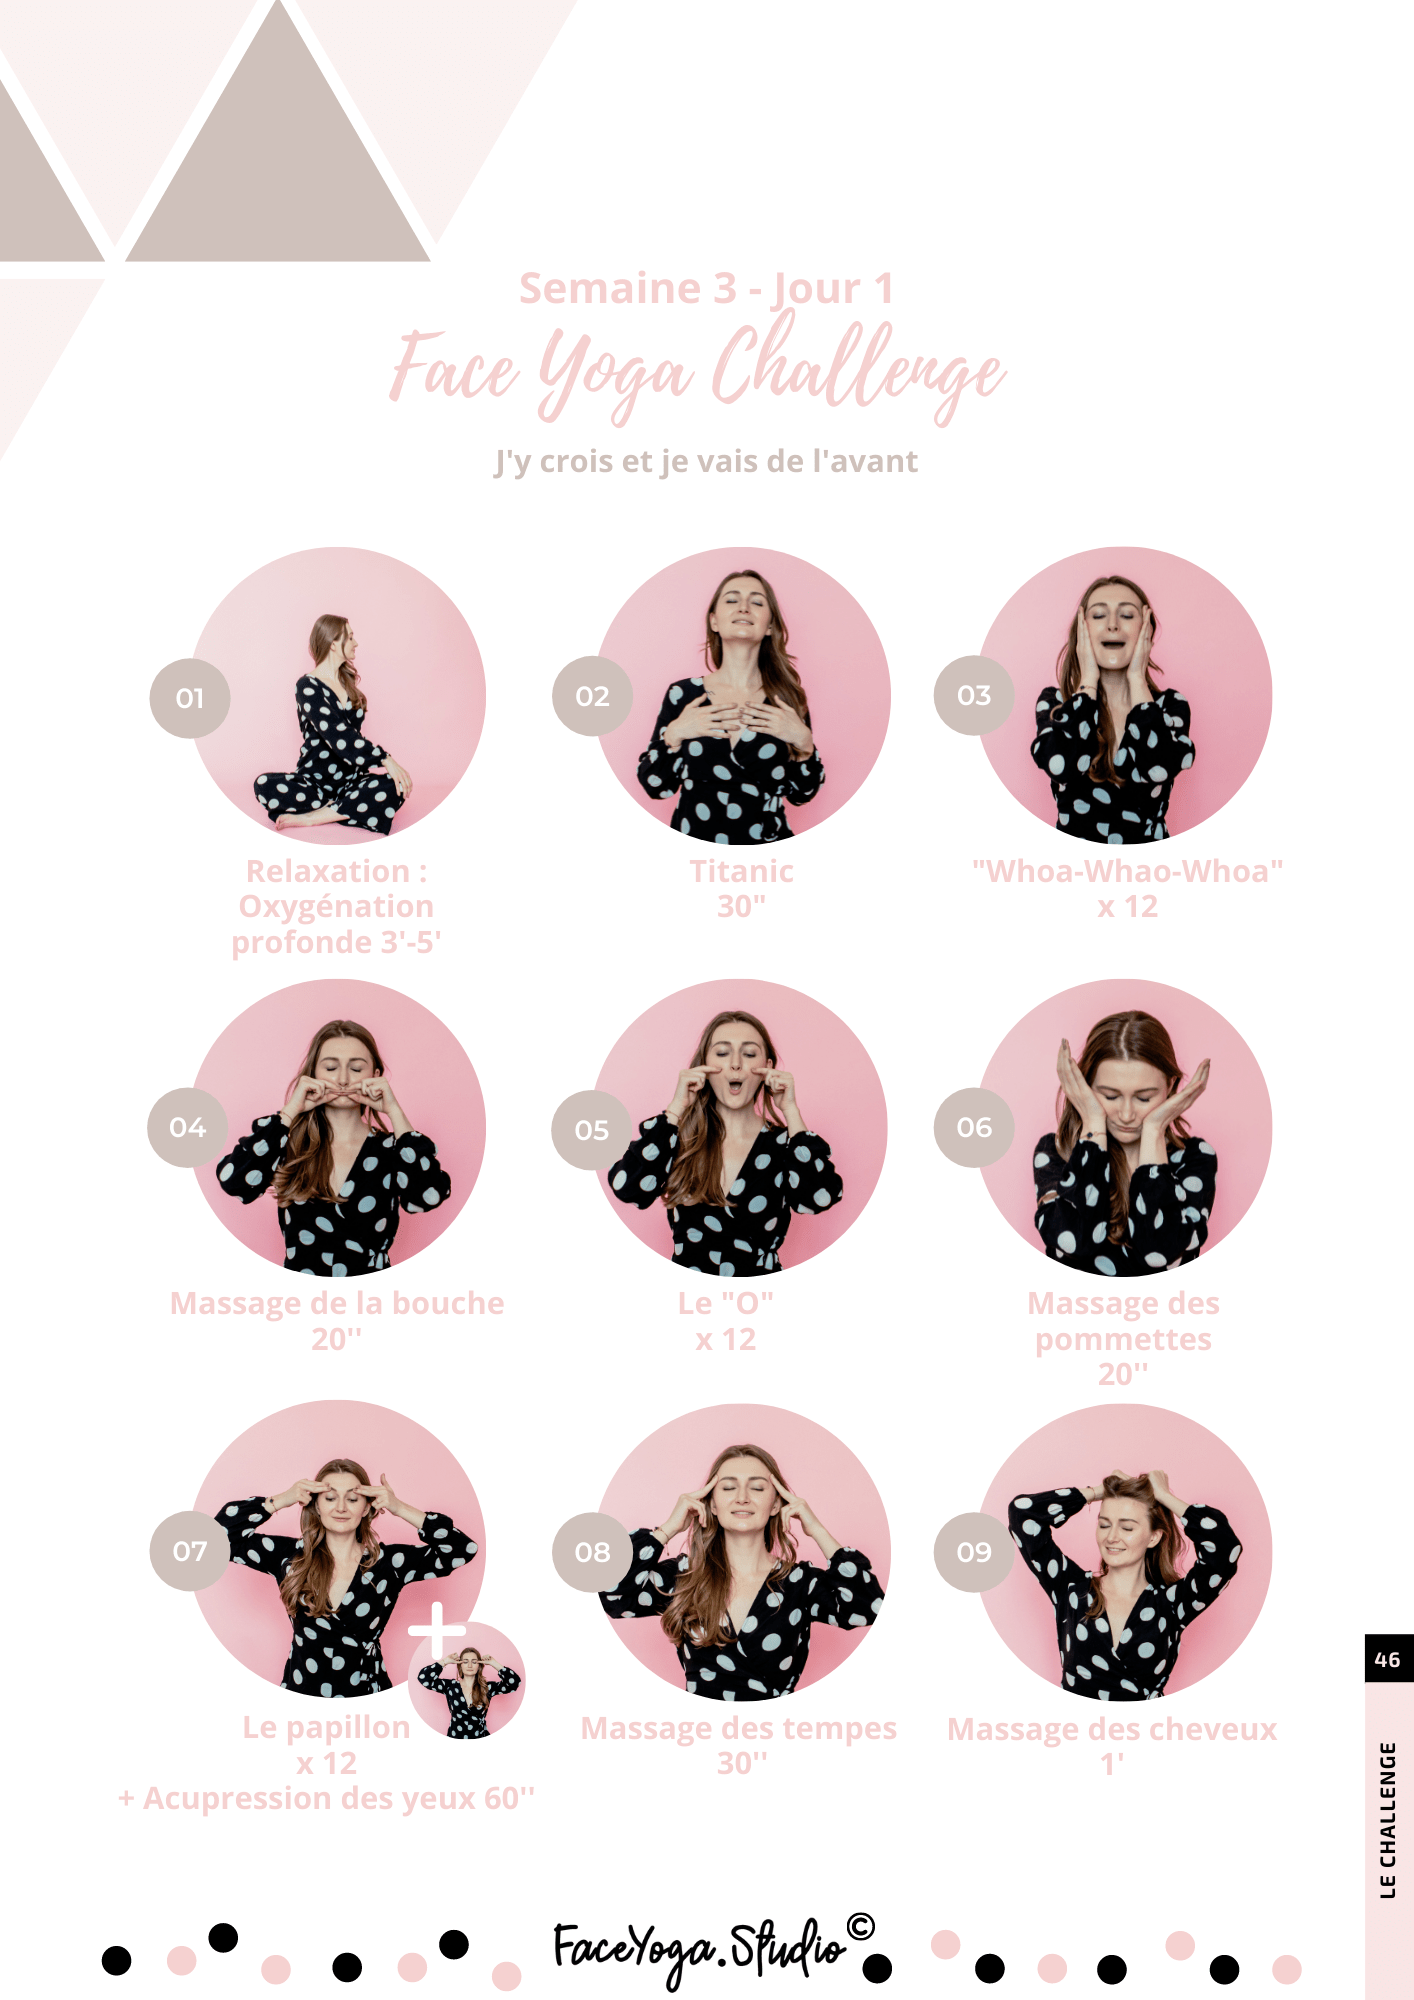 Copy Of E Book Face Yoga Challenge 4.png